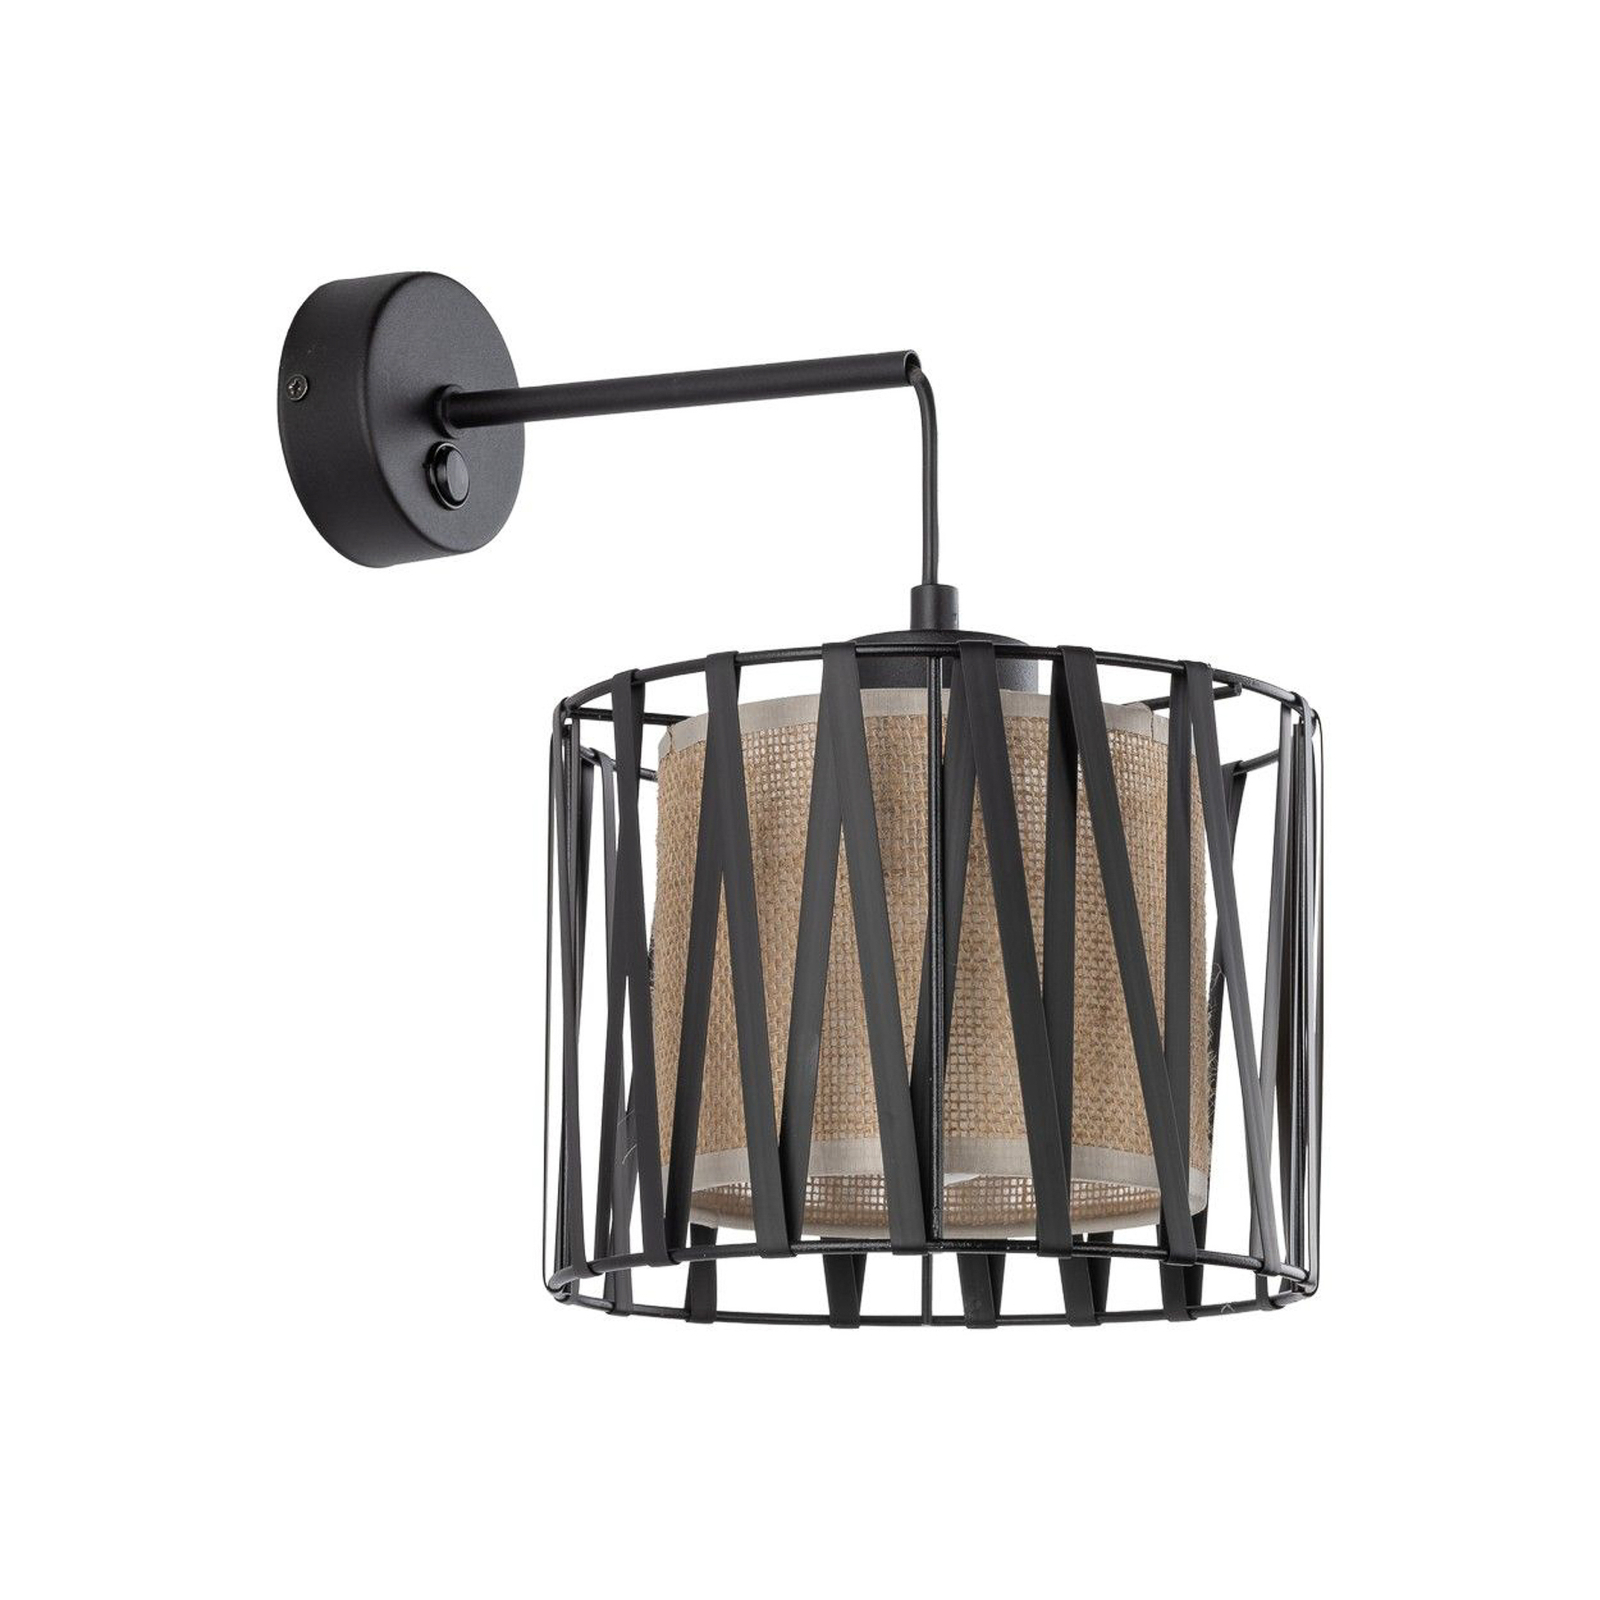 Harmony wall light, black, Jute Natur, with switch